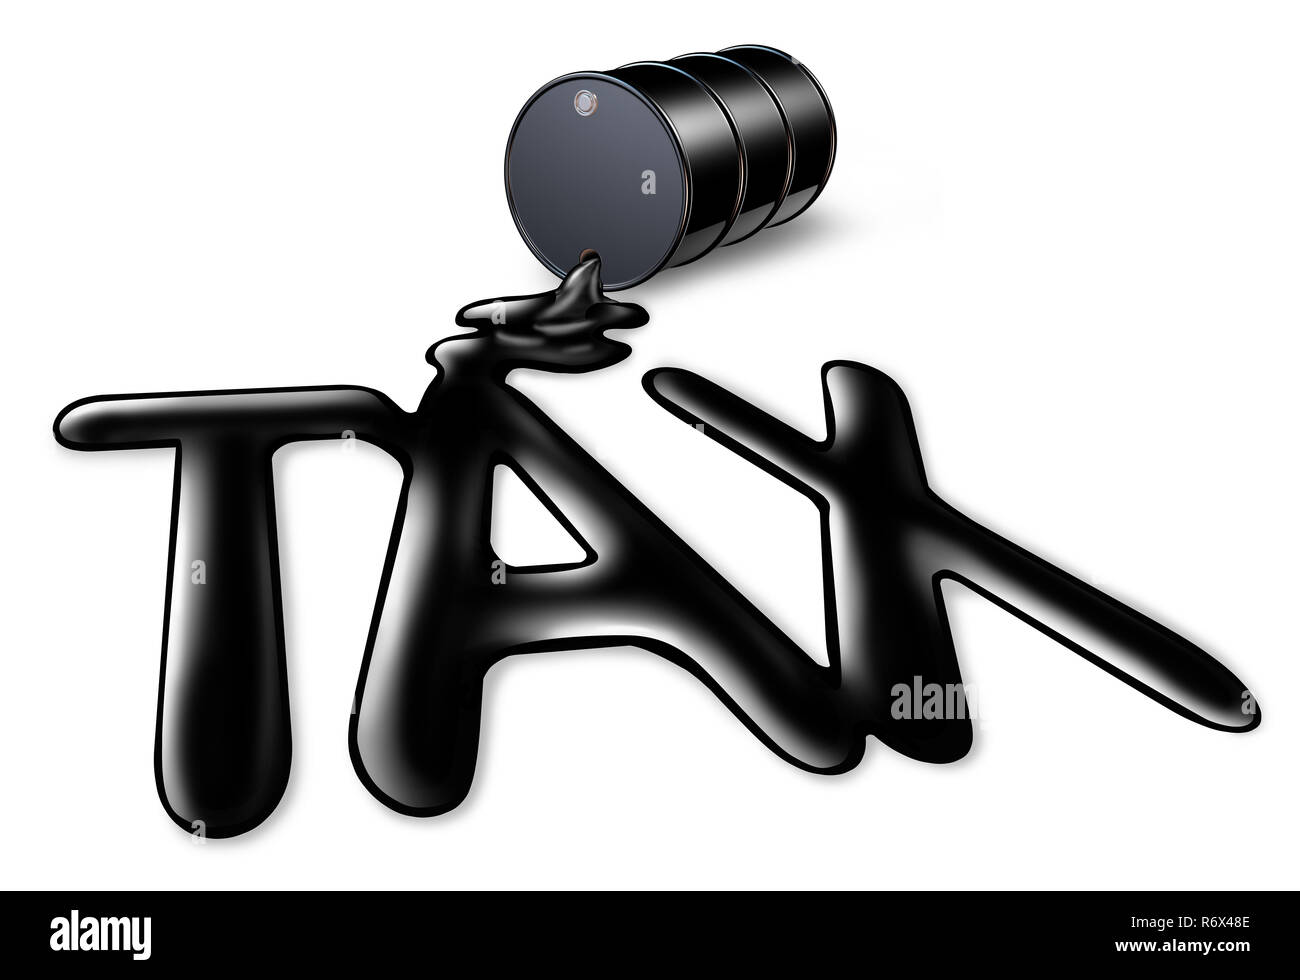 Carbon tax symbol of oil and gas price increase on the value of a barrel of crude with a fuel spill in the shape of taxes text as an icon of energy. Stock Photo